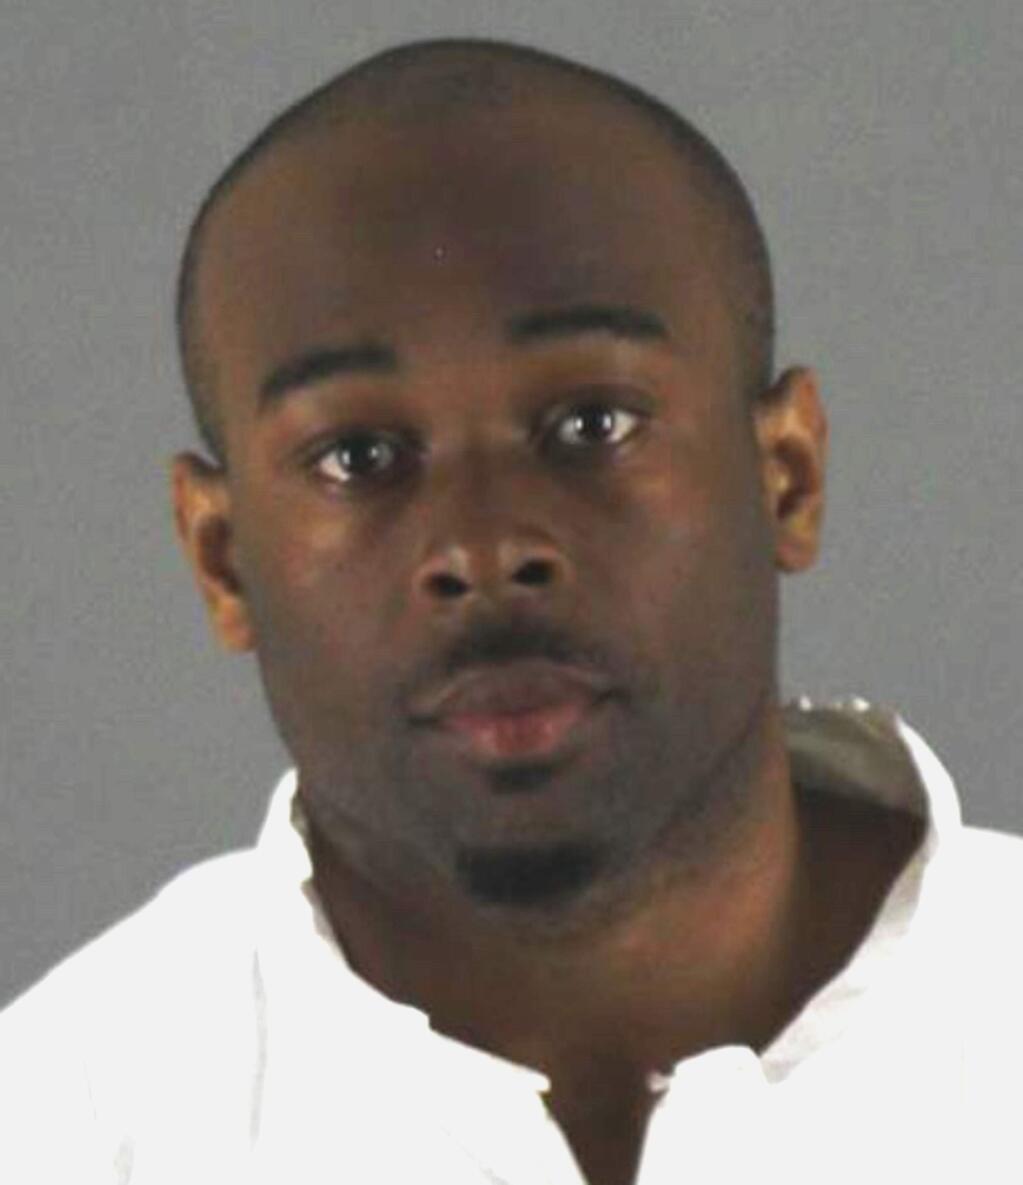 This undated photo provided by the Bloomington, Minn., Police Department, shows Emmanuel Aranda, who was arrested in connection with an incident at the Mall of America where a 5-year-old boy plummeted three floors Friday, April 12, 2019, after being pushed or thrown from a balcony. Aranda is expected to appear in court Tuesday, May 14, for a hearing. (Bloomington Police Department via AP)